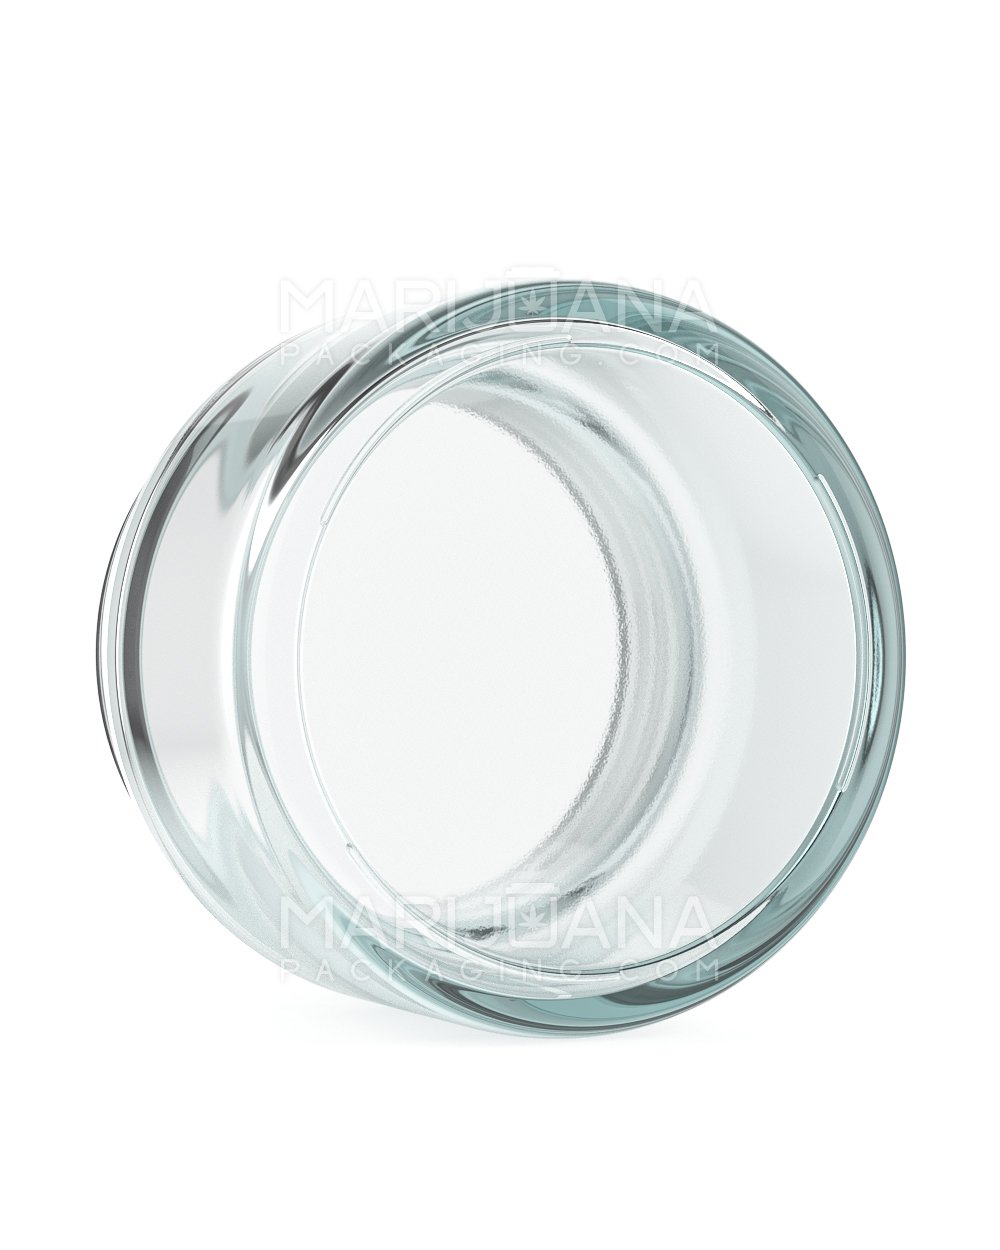 Straight Sided Clear Glass Jars | 63mm - 3.4oz - 96 Count - 4